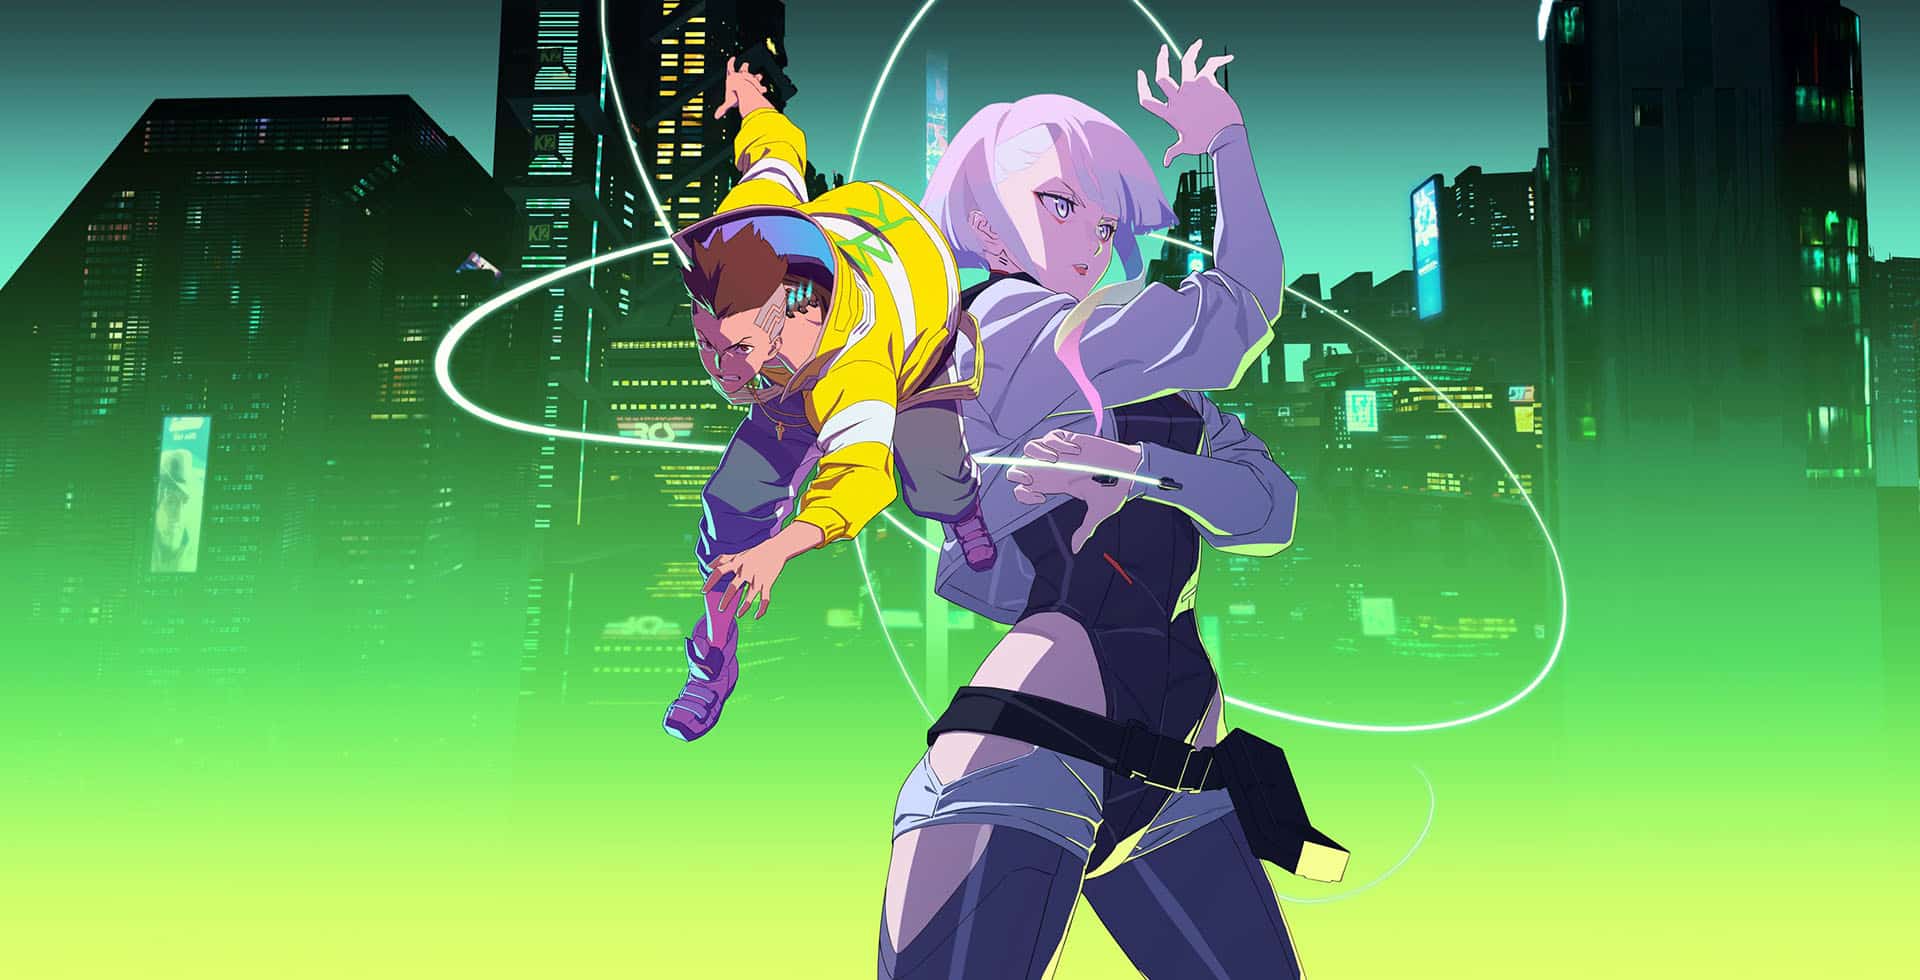 Cyberpunk Edgerunners producer says there are no plans for a second season